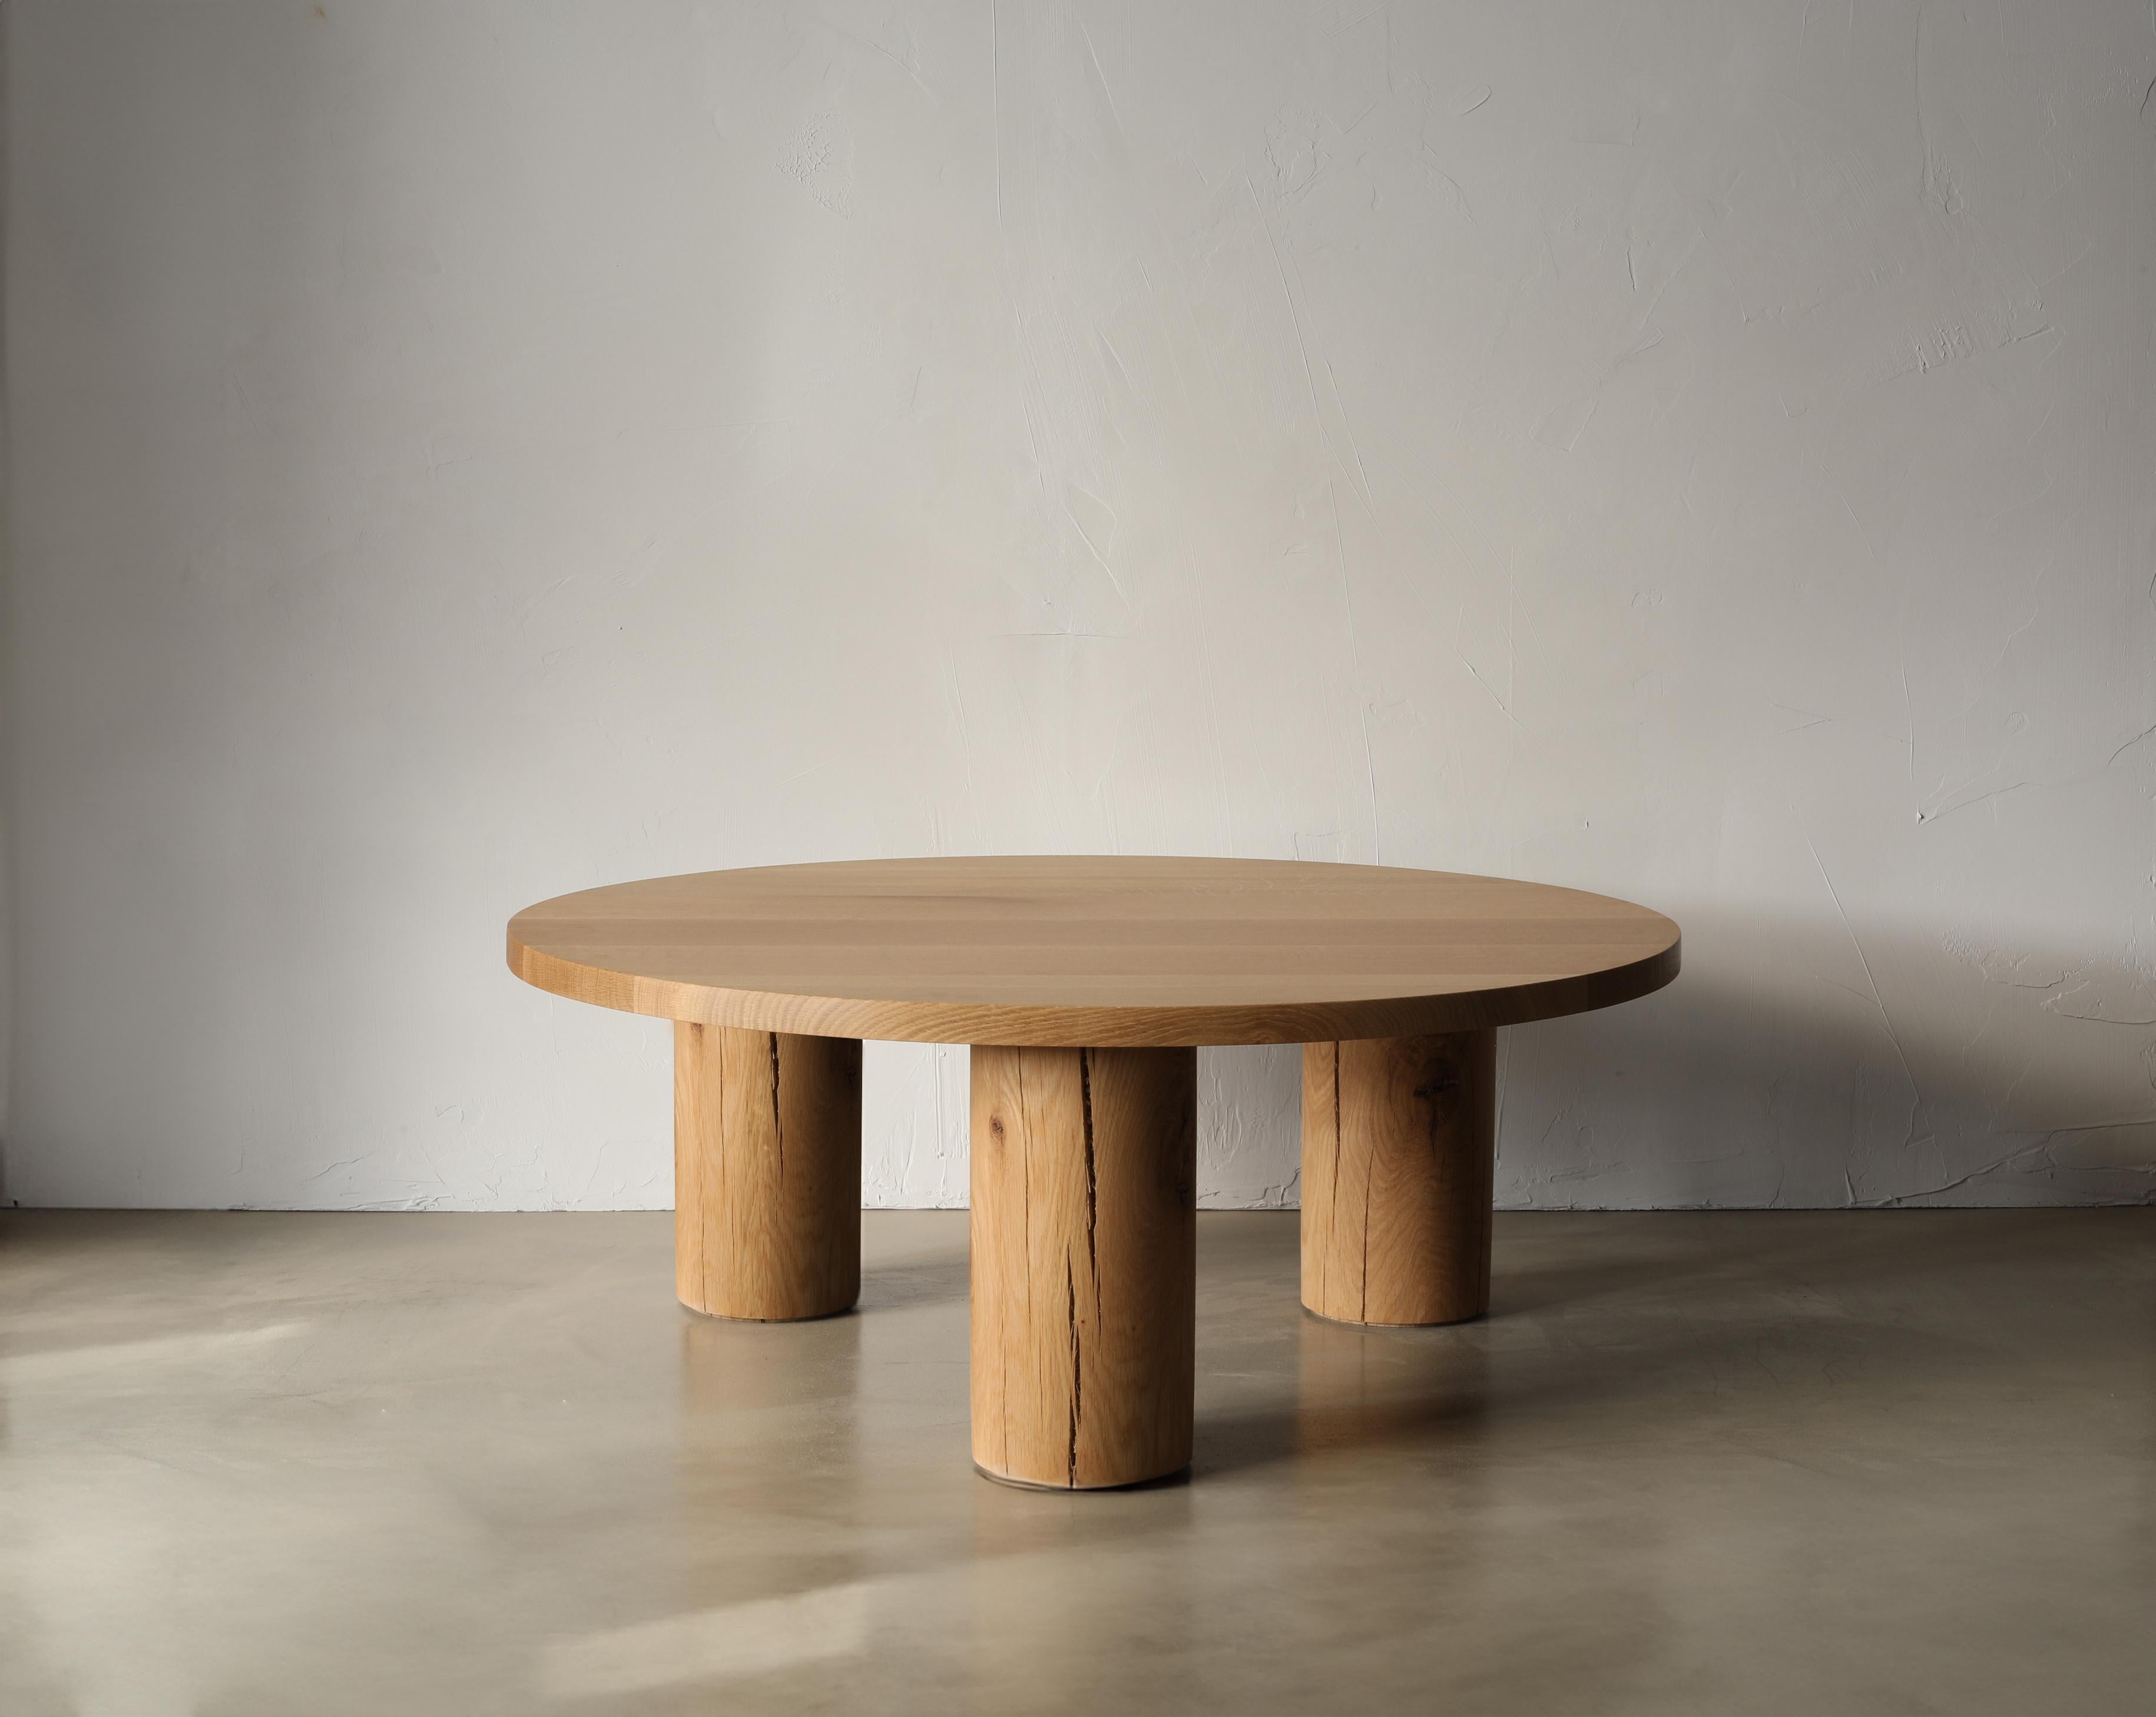 The round Revolve coffee table is 42” in diameter and 16” high. The default top is rift-sawn white oak and the bases are solid white oak. Materials, finishes, and sizes may be optioned out at additional cost.

The Revolve collection - Graphic forms